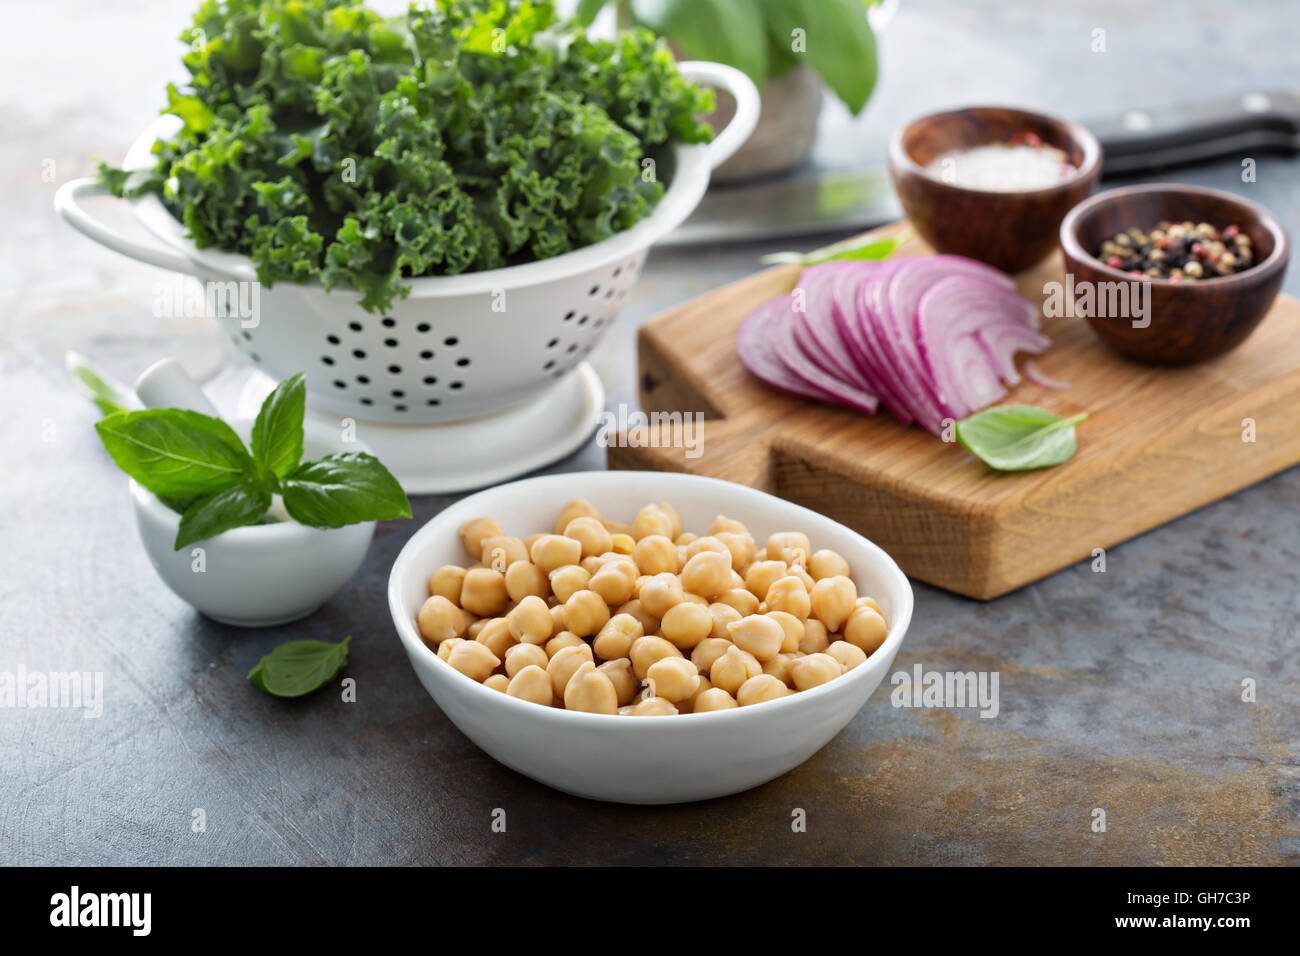 Cooking with kale and chickpeas Stock Photo